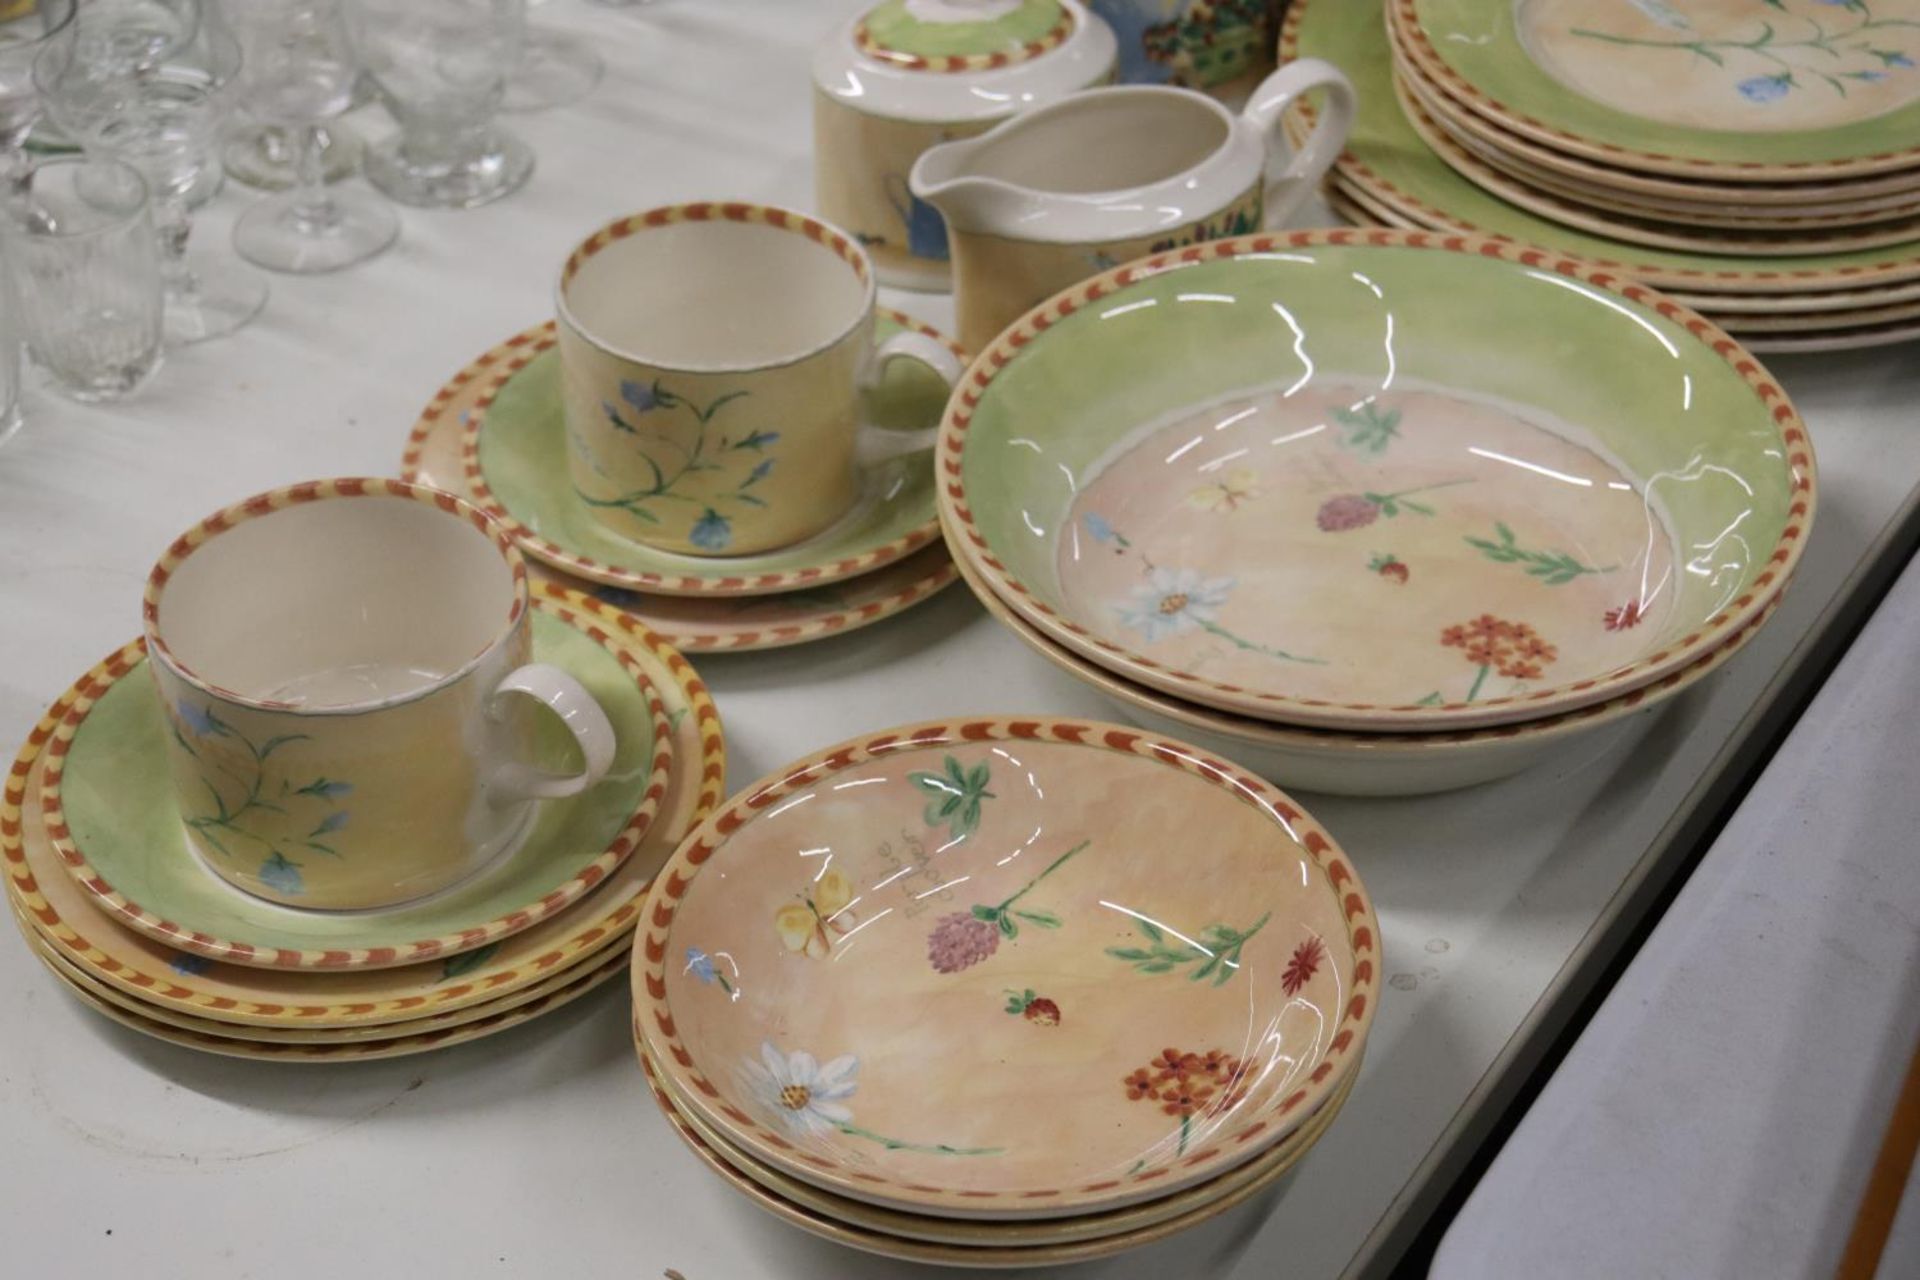 A PART DINNER SERVICE TO INCLUDE PLATES, LARGE BOWLS, DESSERT BOWLS, A TEAPOT, SUGAR BOWL, CREAM - Image 3 of 6